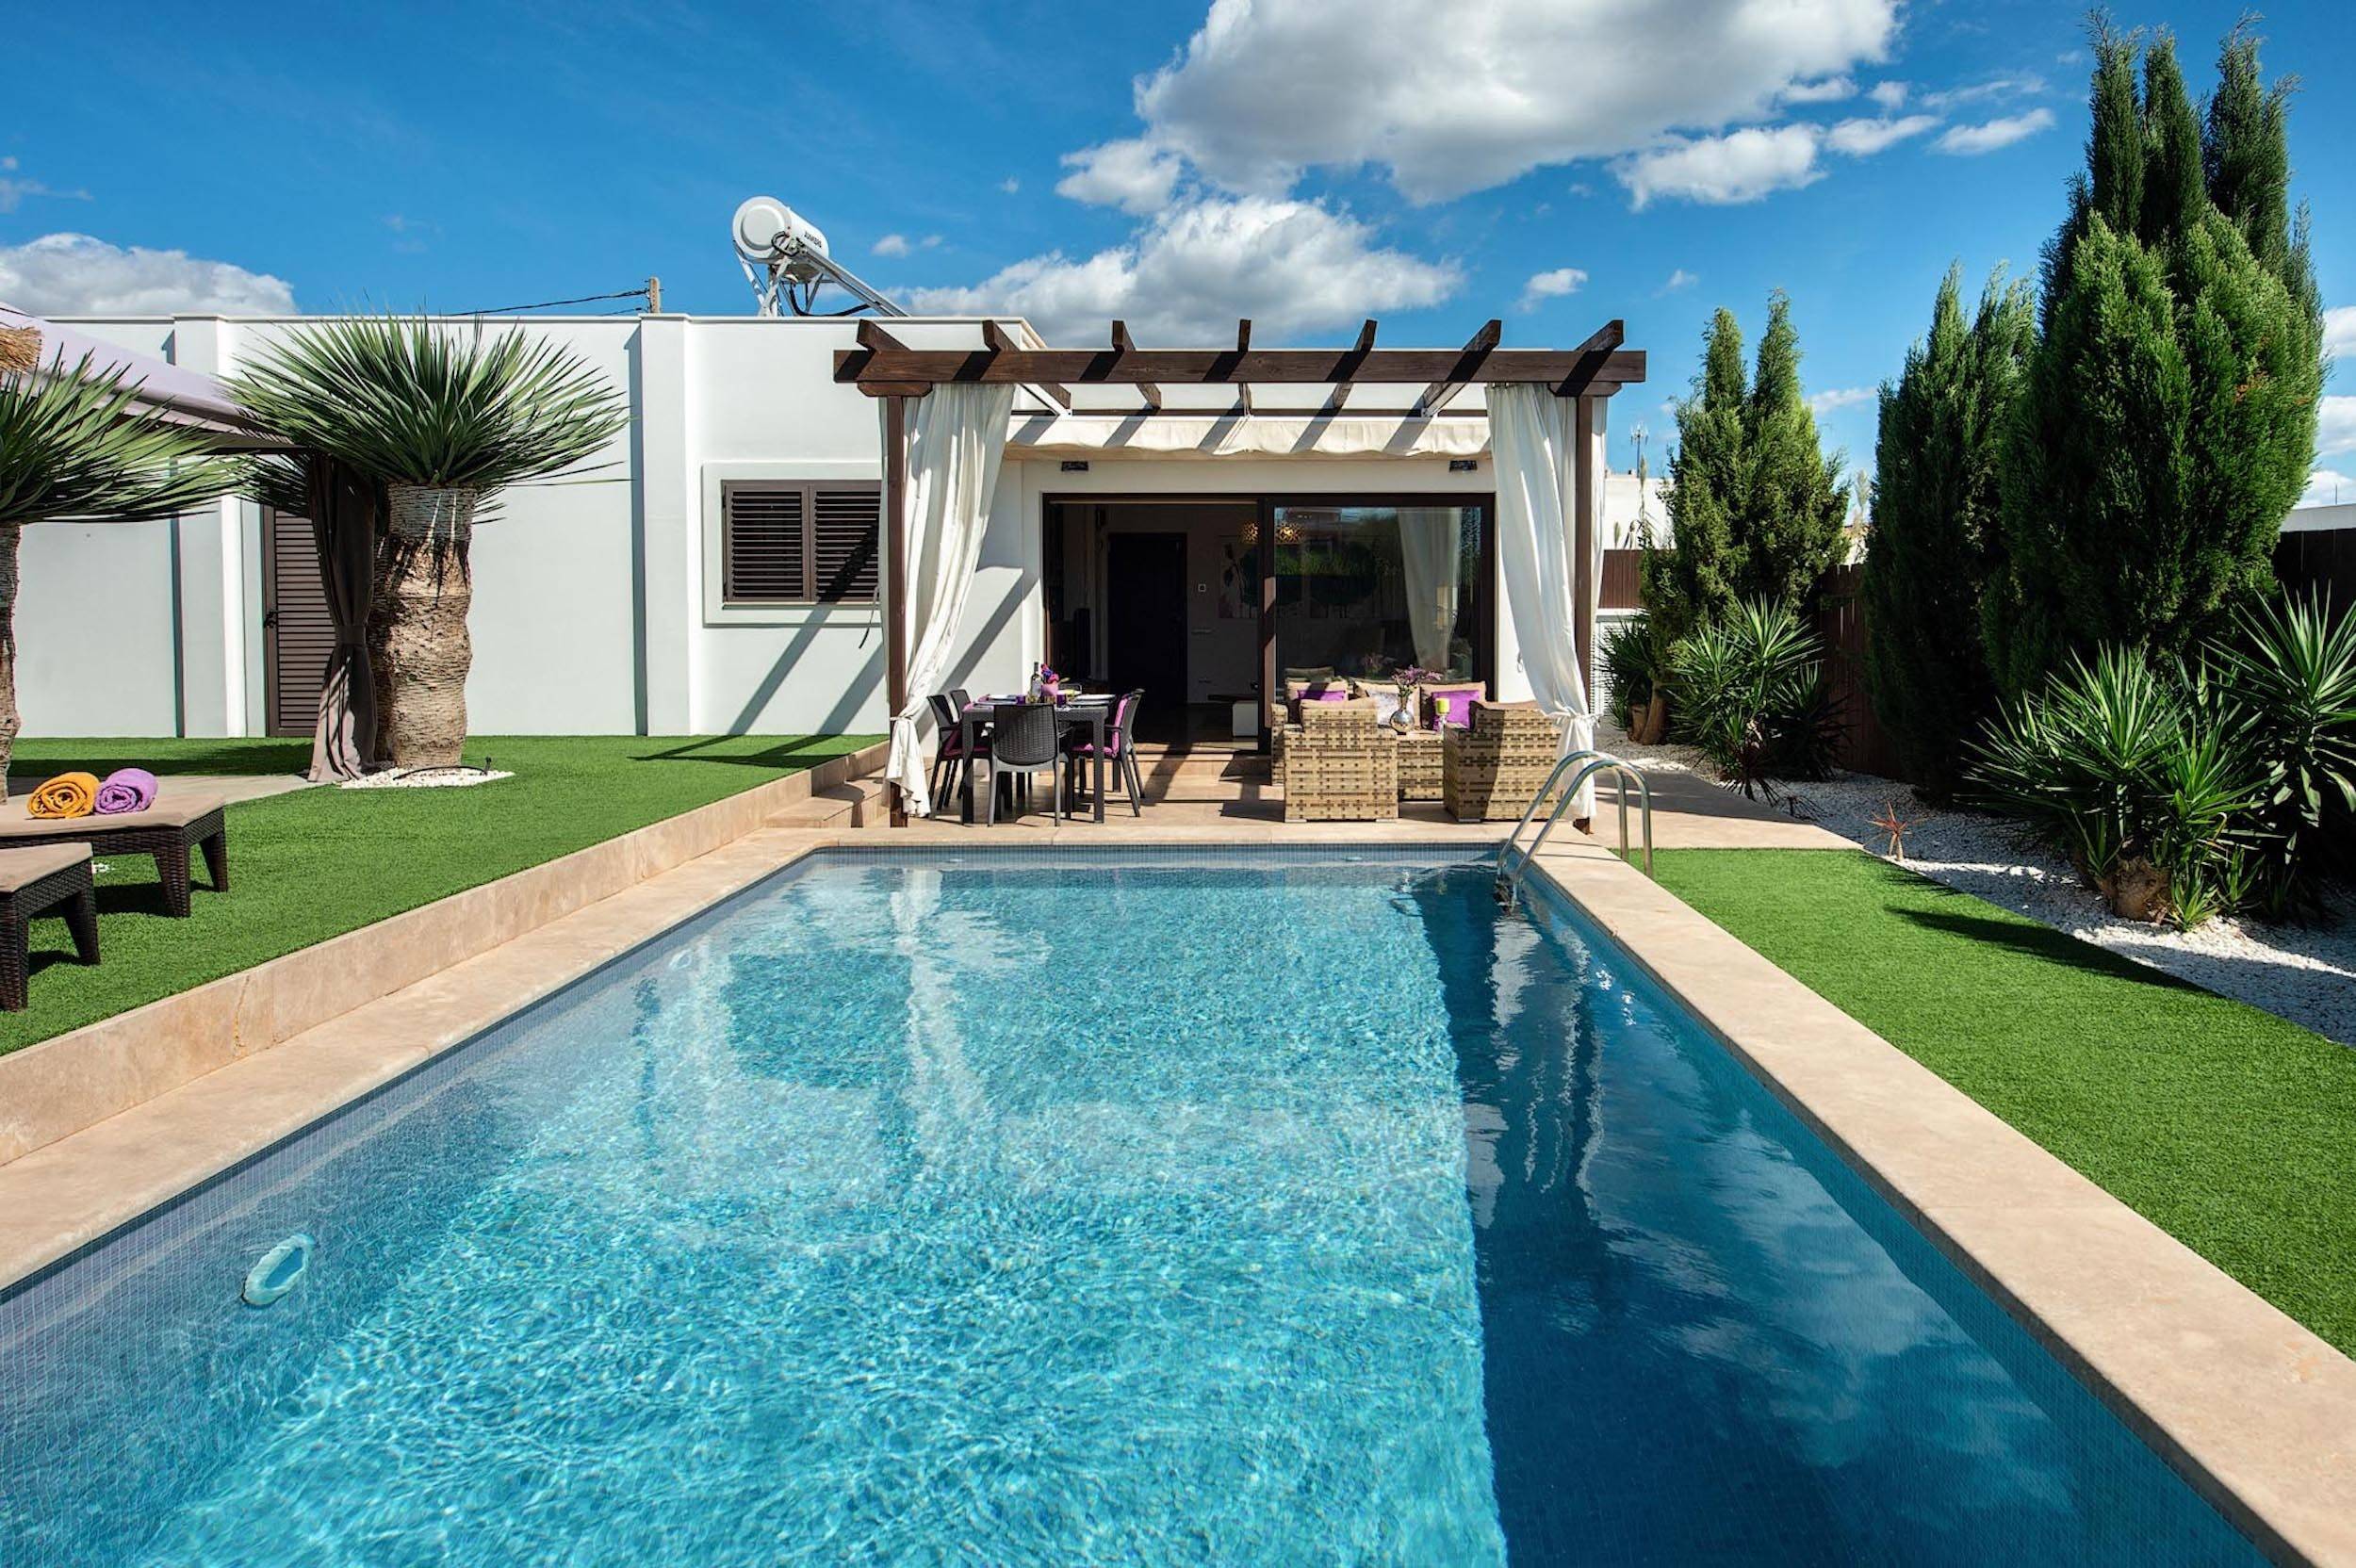 You are currently viewing Villa Tavaris “A charming, newly built 3-bedroom villa, situated in an exclusive residential area of Ibiza Town.”